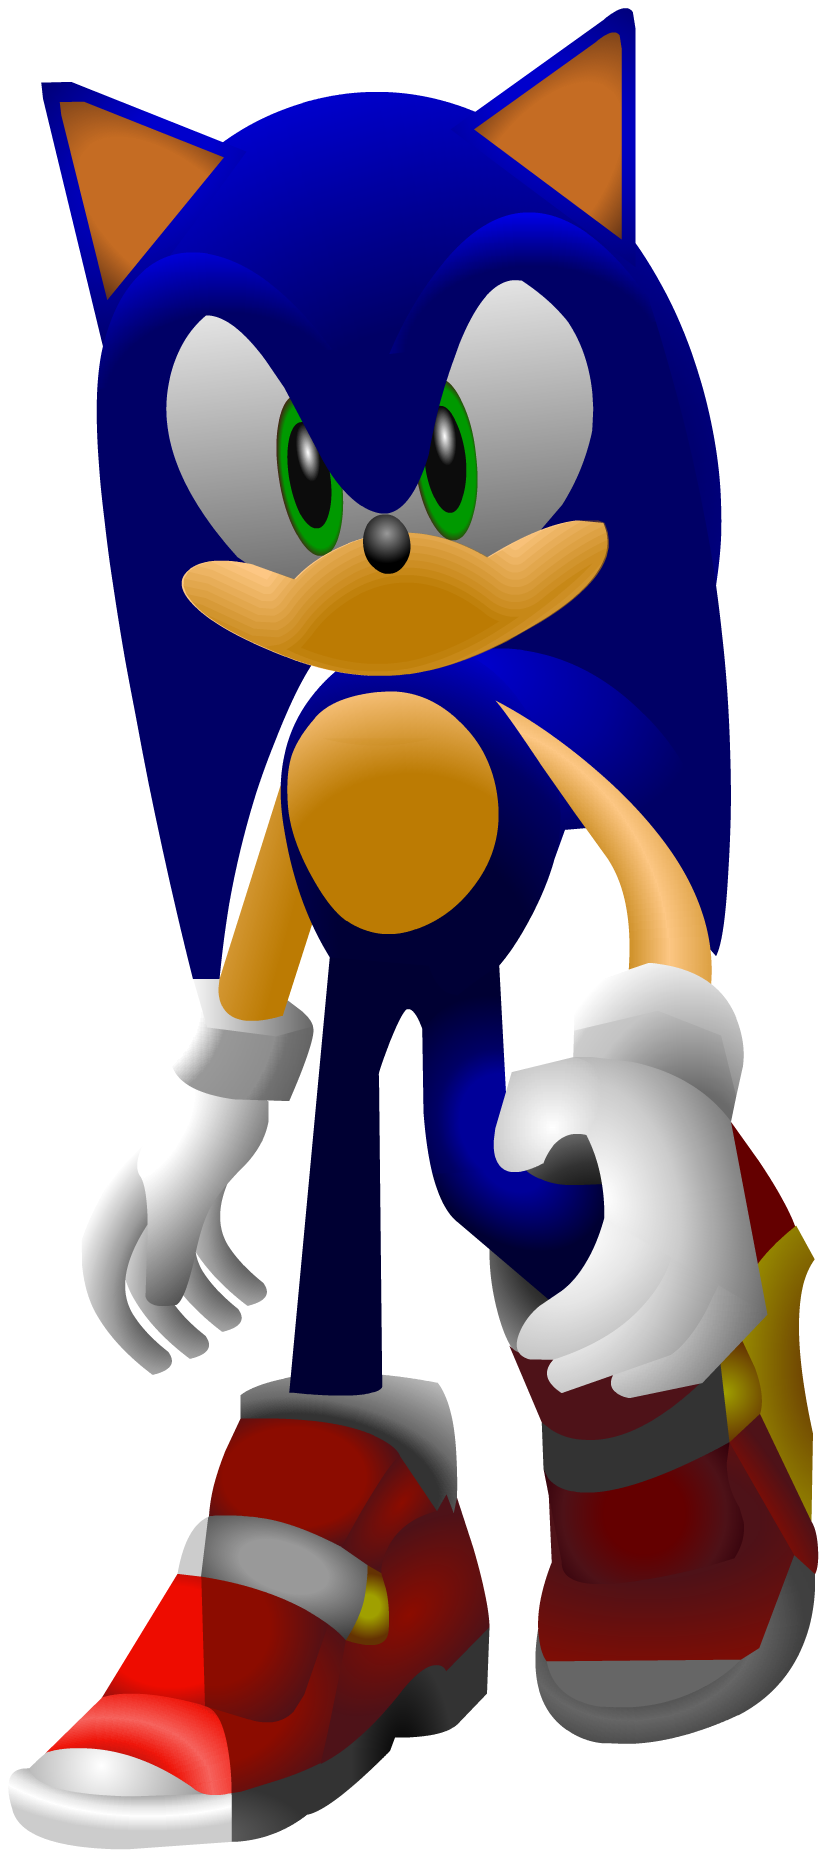 Sonic Adventure 2 - Sonic the Hedgehog - Gallery - Sonic SCANF